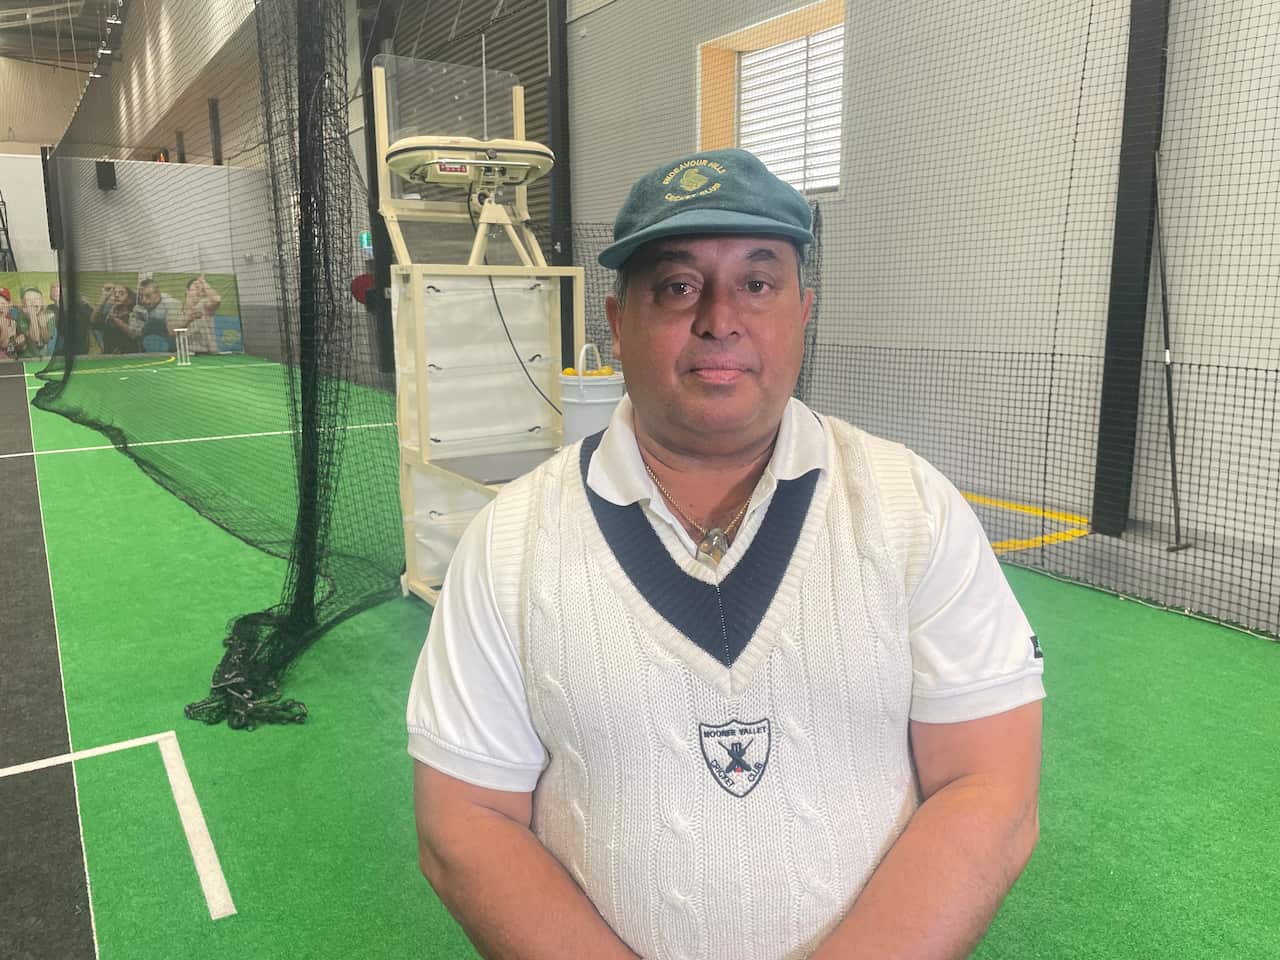 A man wearing a white cricket jumper and white shirt and a green cap posing for a picture in an indoor cricket net